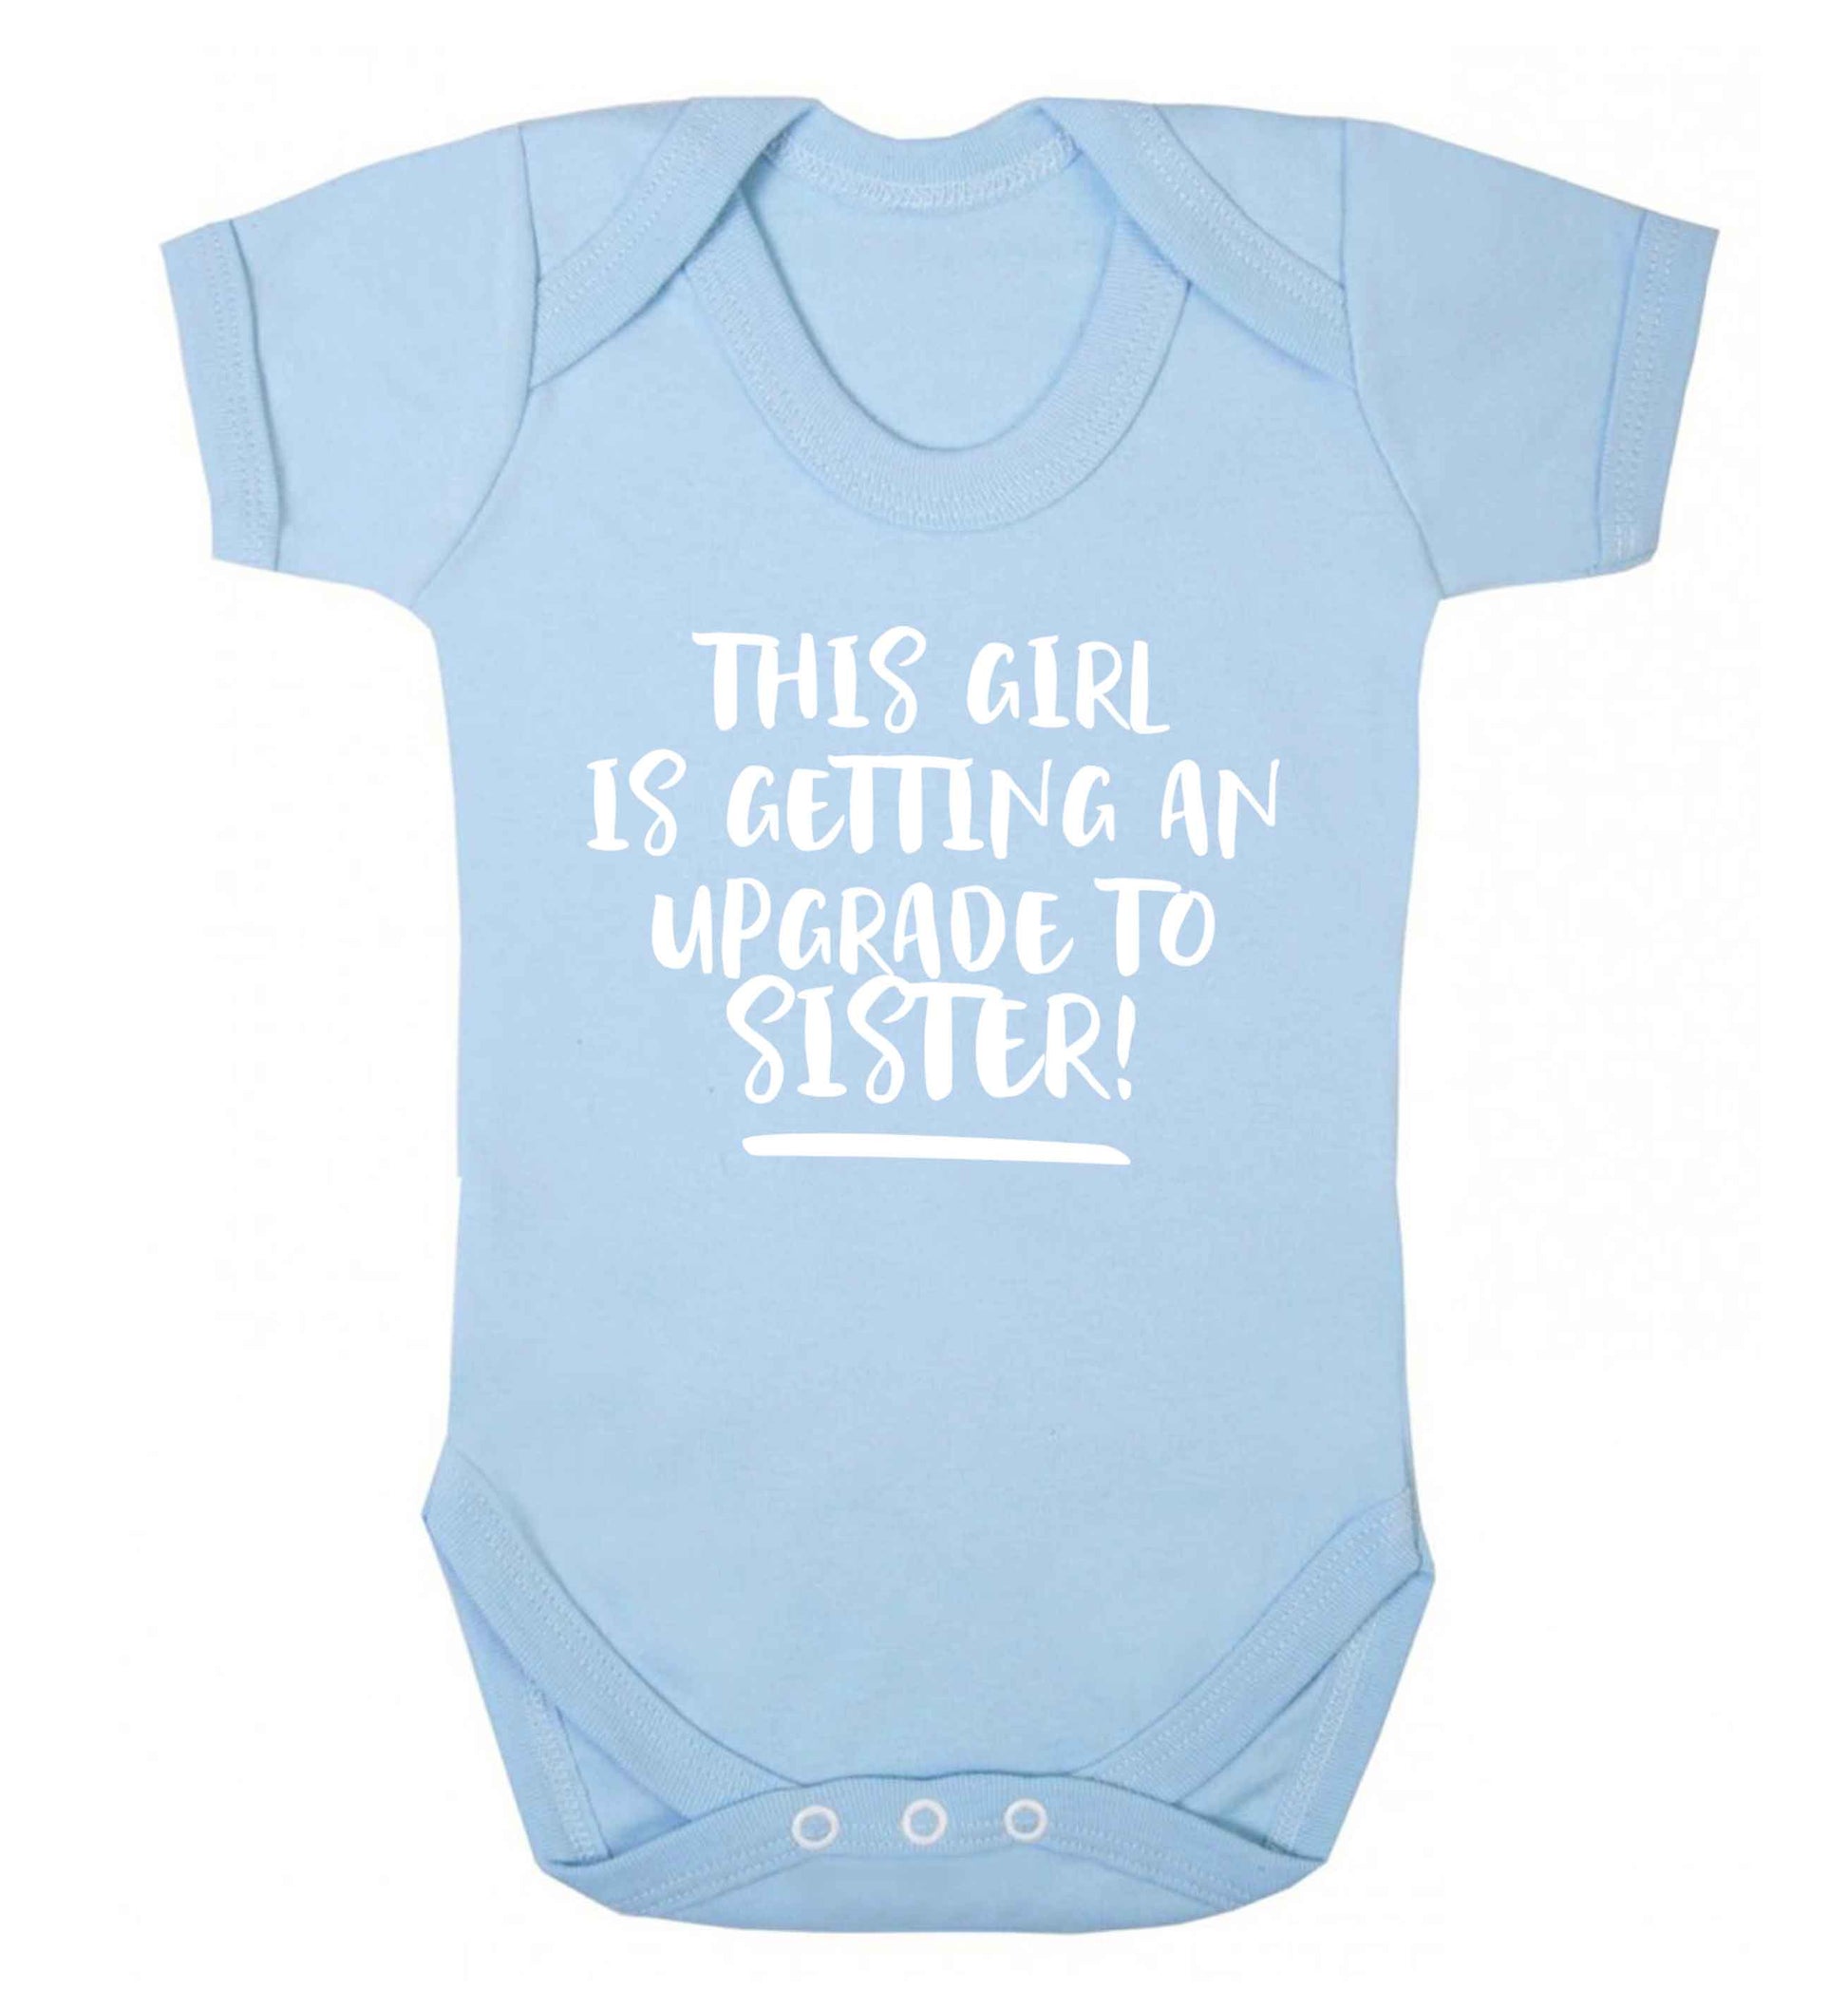 This girl is getting an upgrade to sister! Baby Vest pale blue 18-24 months